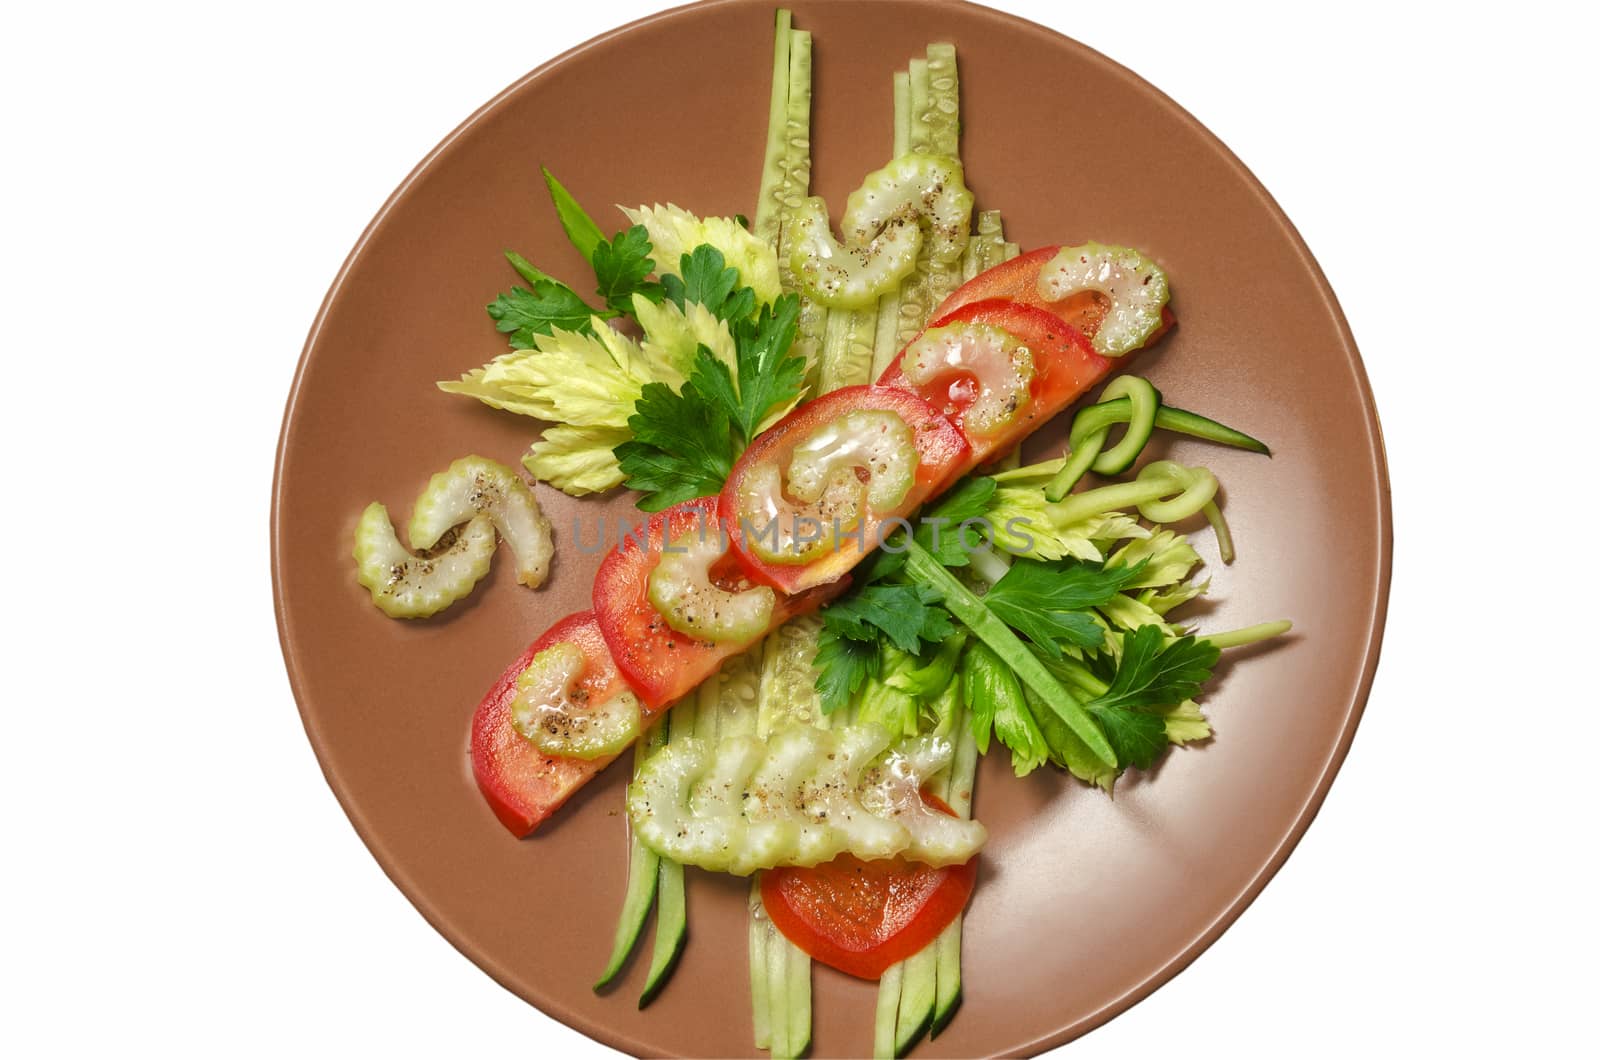 Dish with the thread from vegetables by Gaina